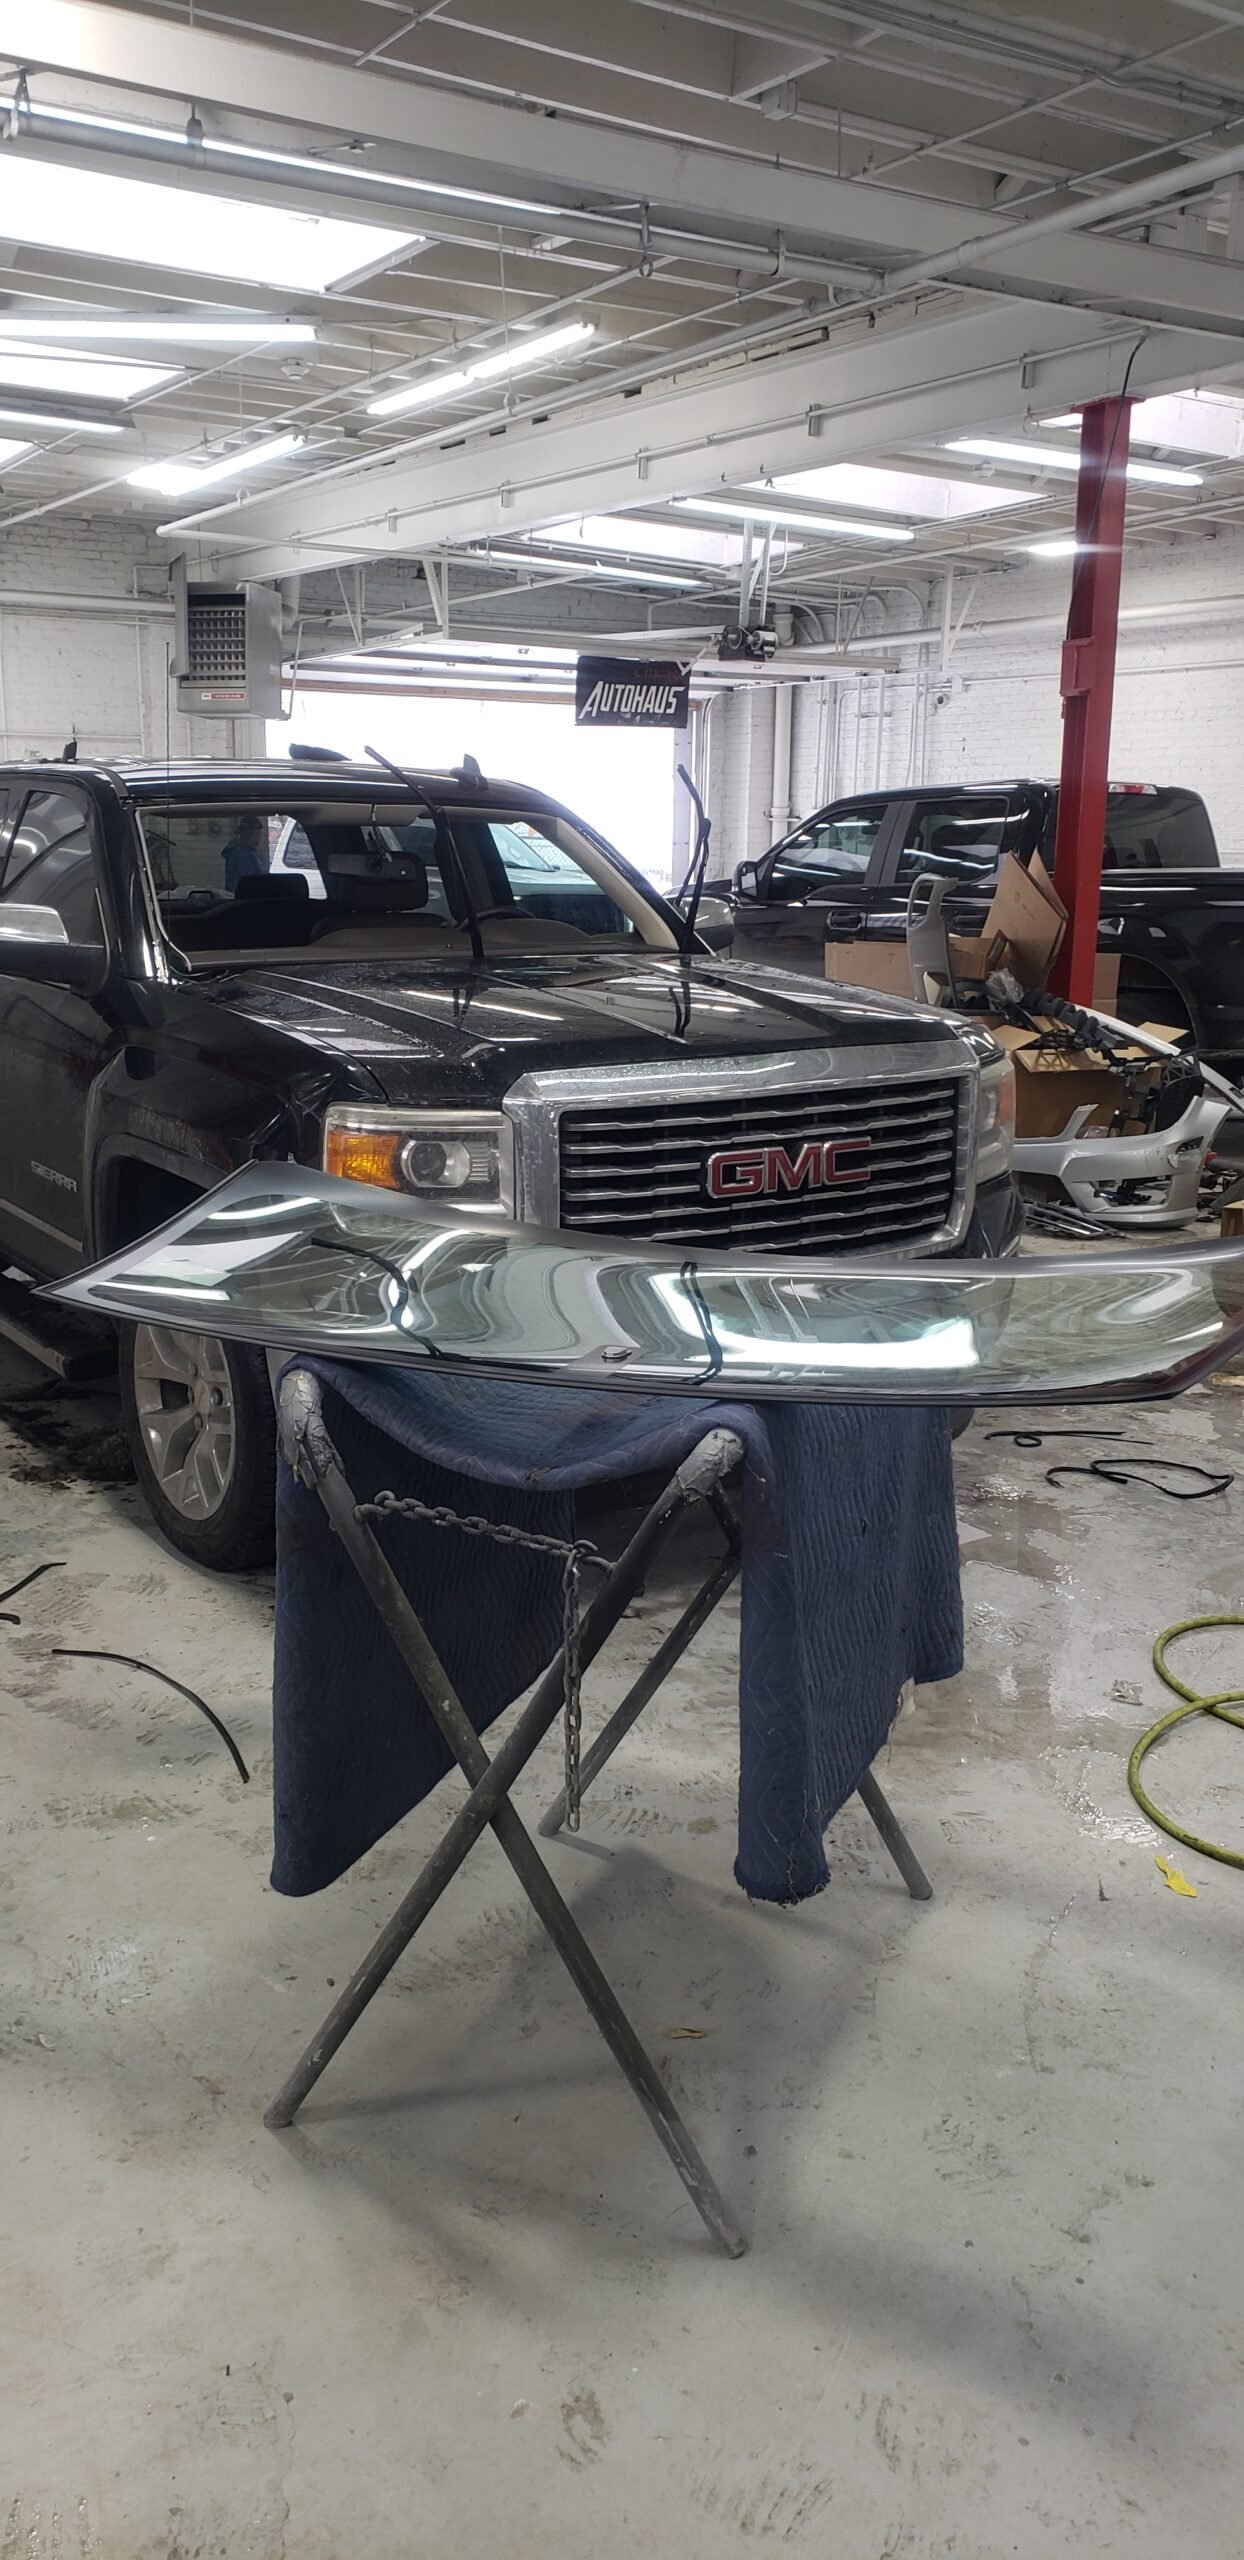 F150 windshield replacement